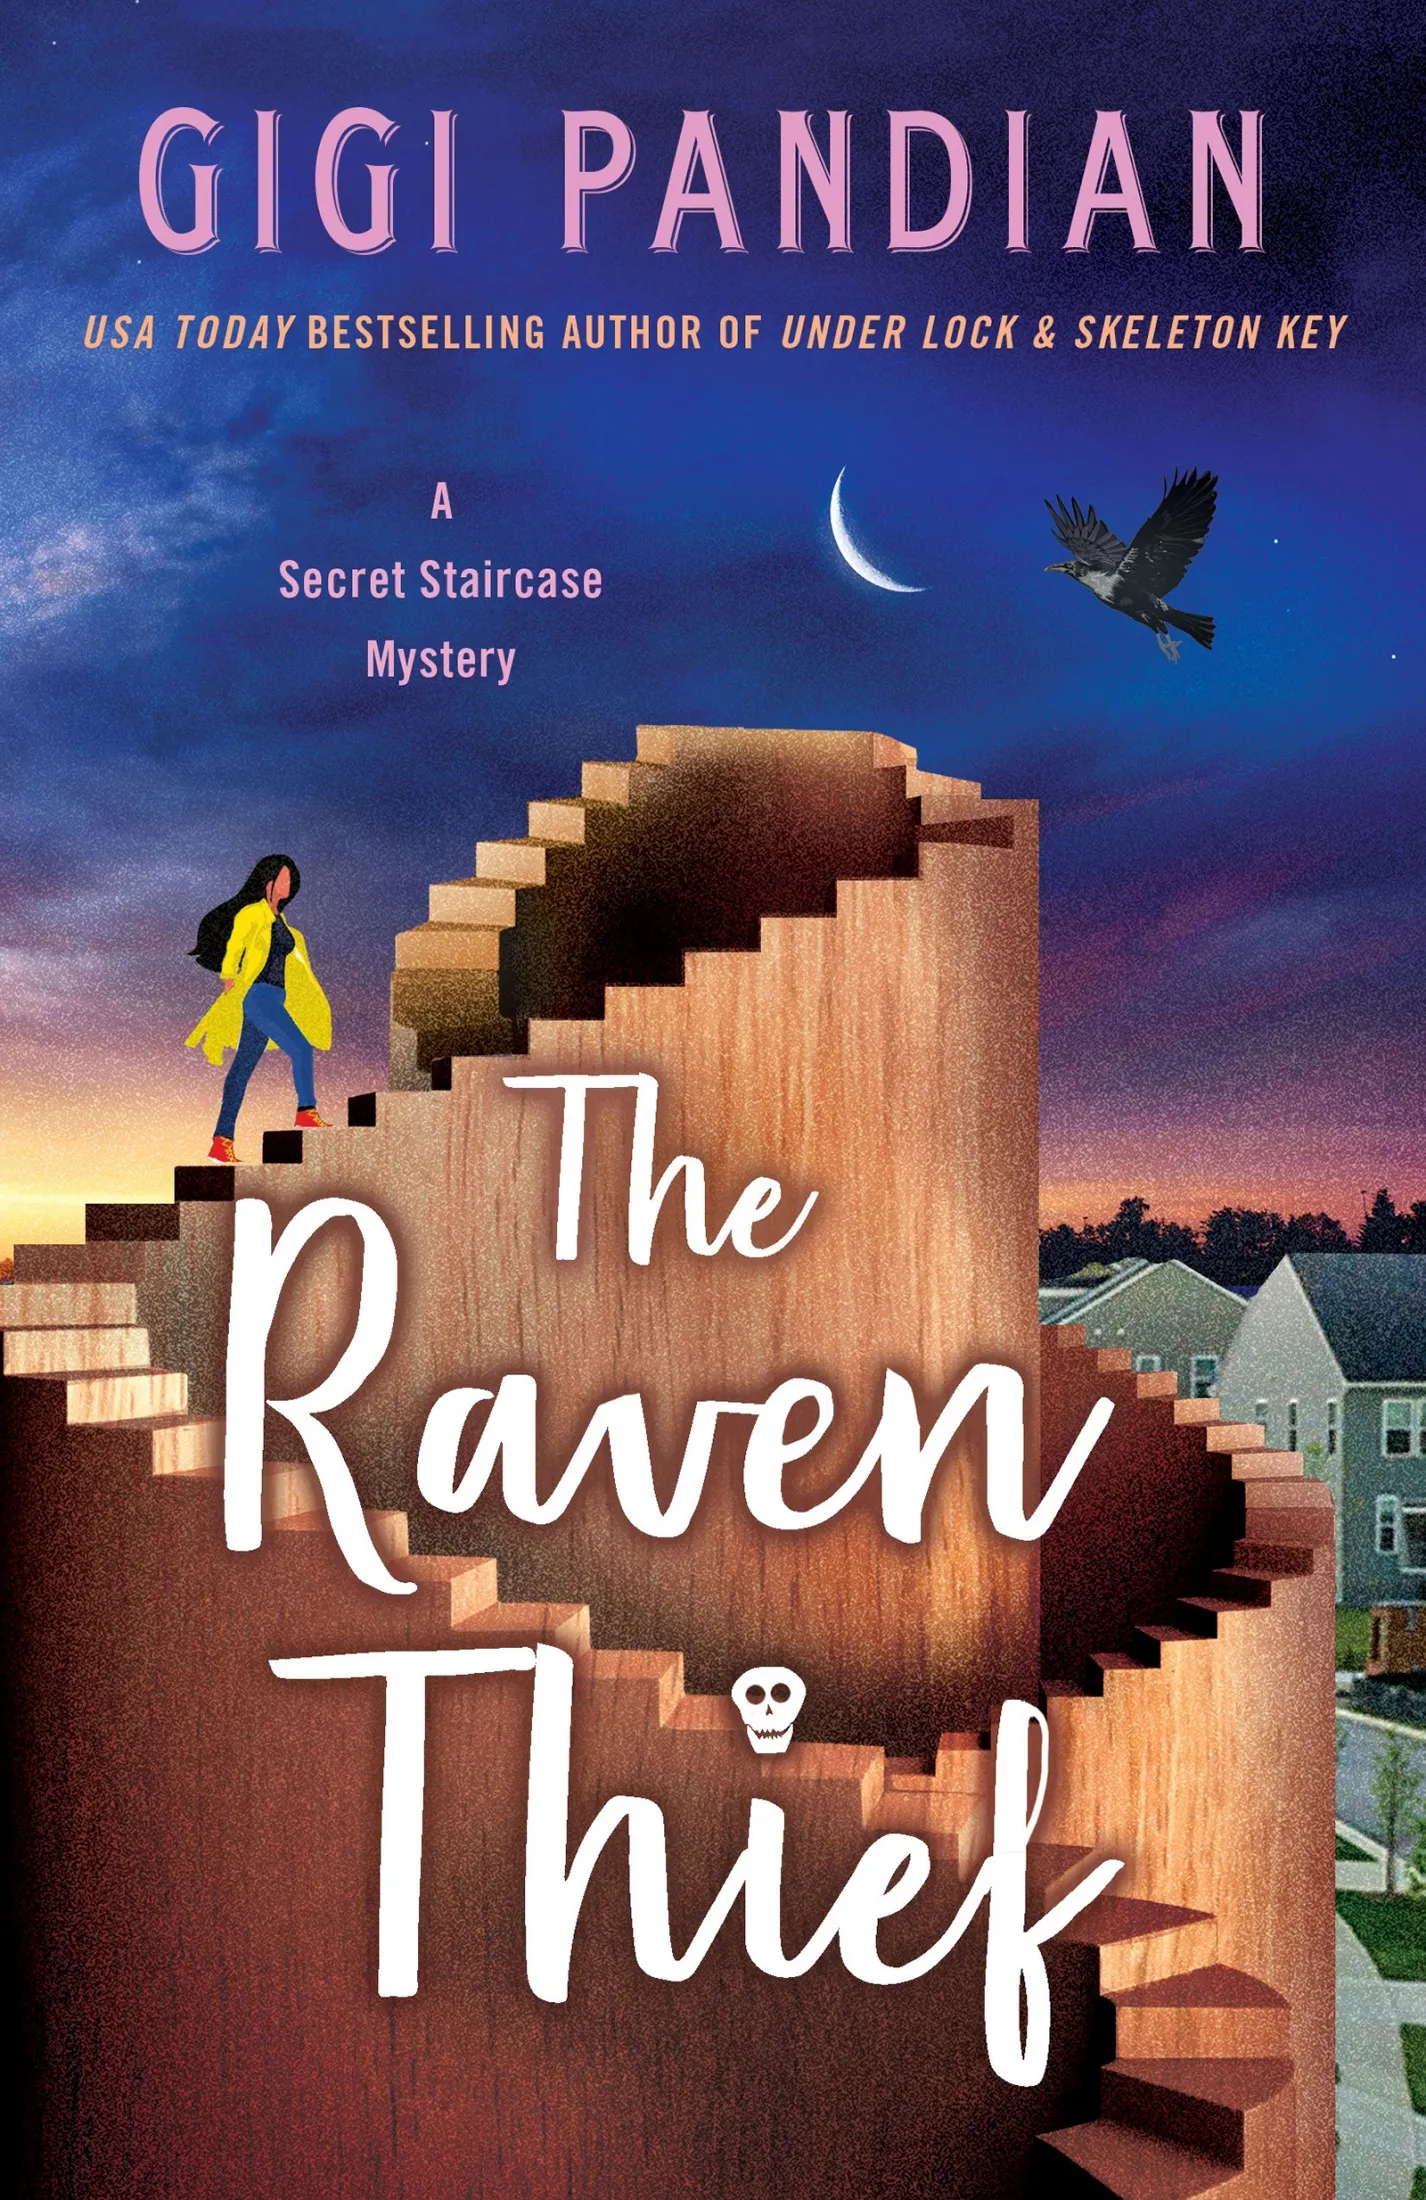 The Raven Thief (Secret Staircase Mysteries #2)